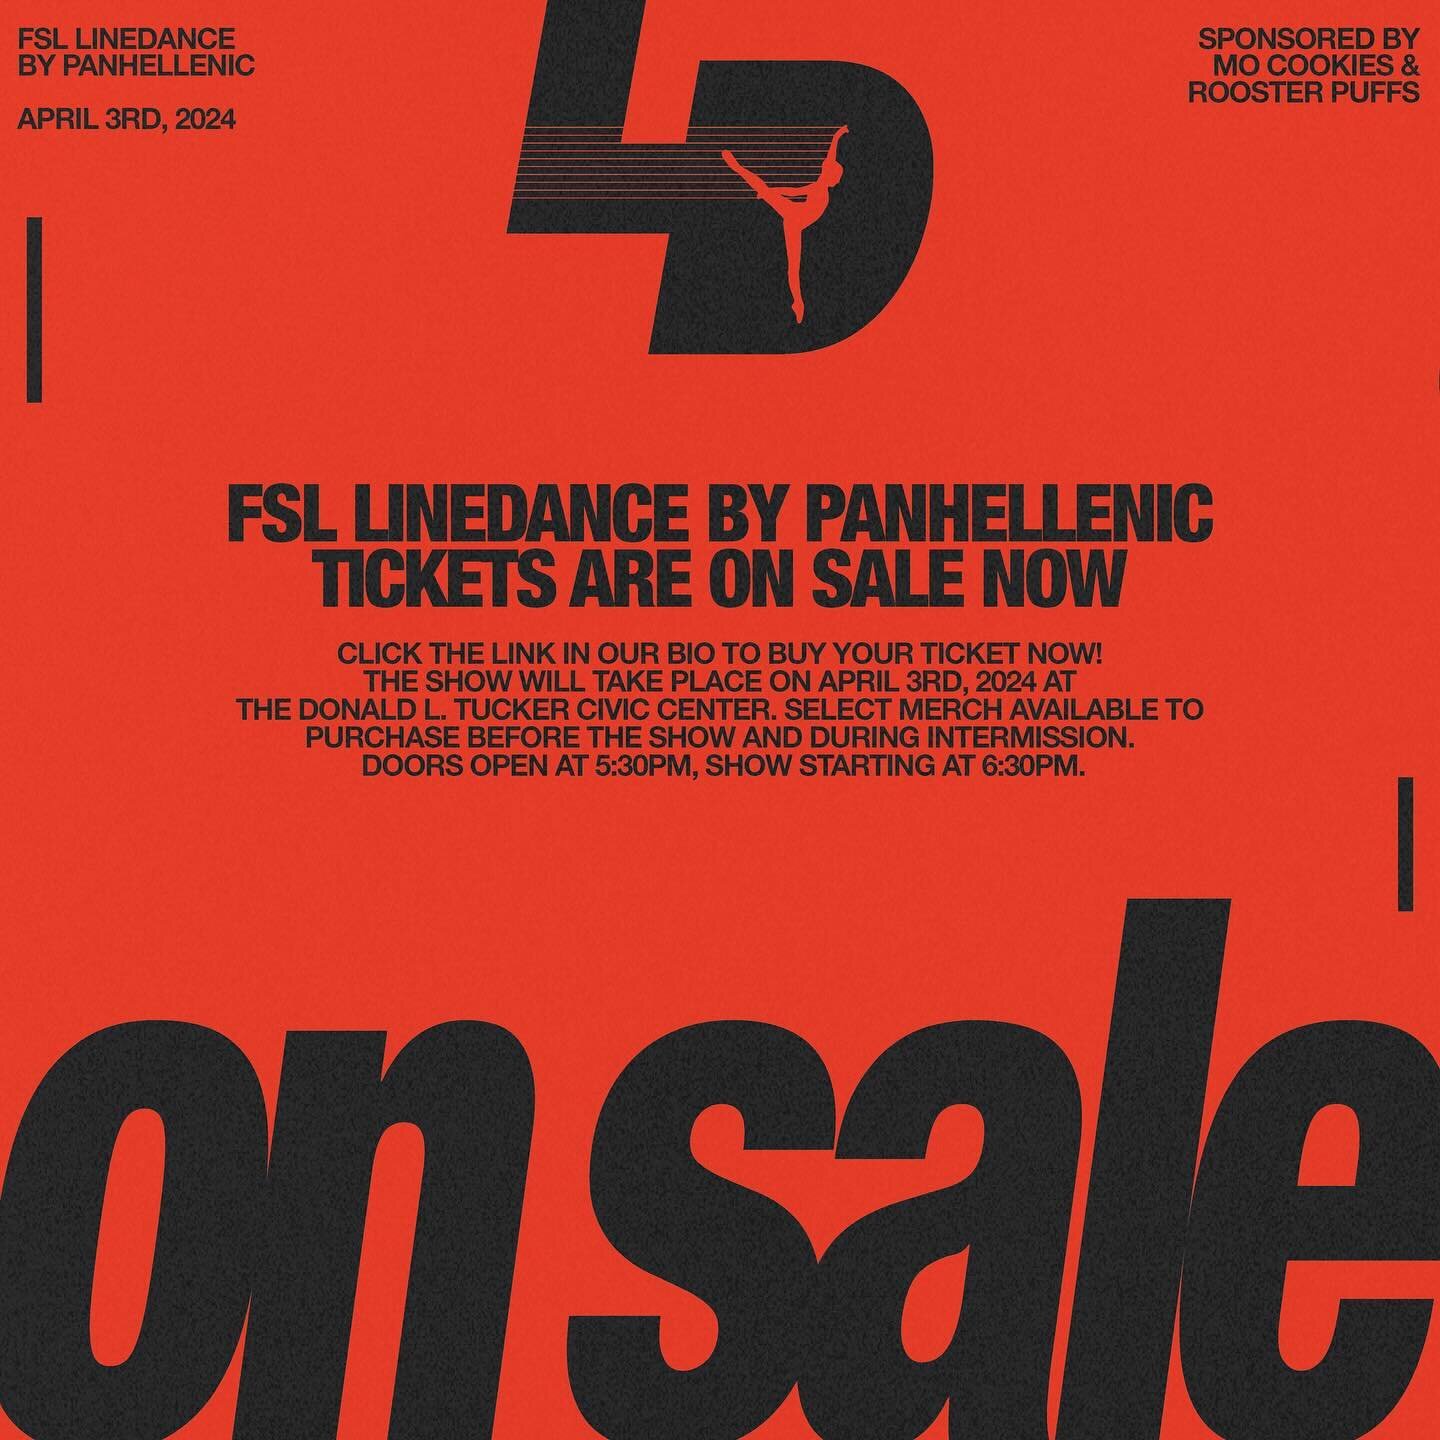 ‼️FSL LINEDANCE TICKET SALES ARE LIVE‼️Click the link in our bio to purchase your ticket now! Make sure to use the ticket code for your chapter when you purchase your ticket! If you buy in person at the box office the ticket will be with reduced fees